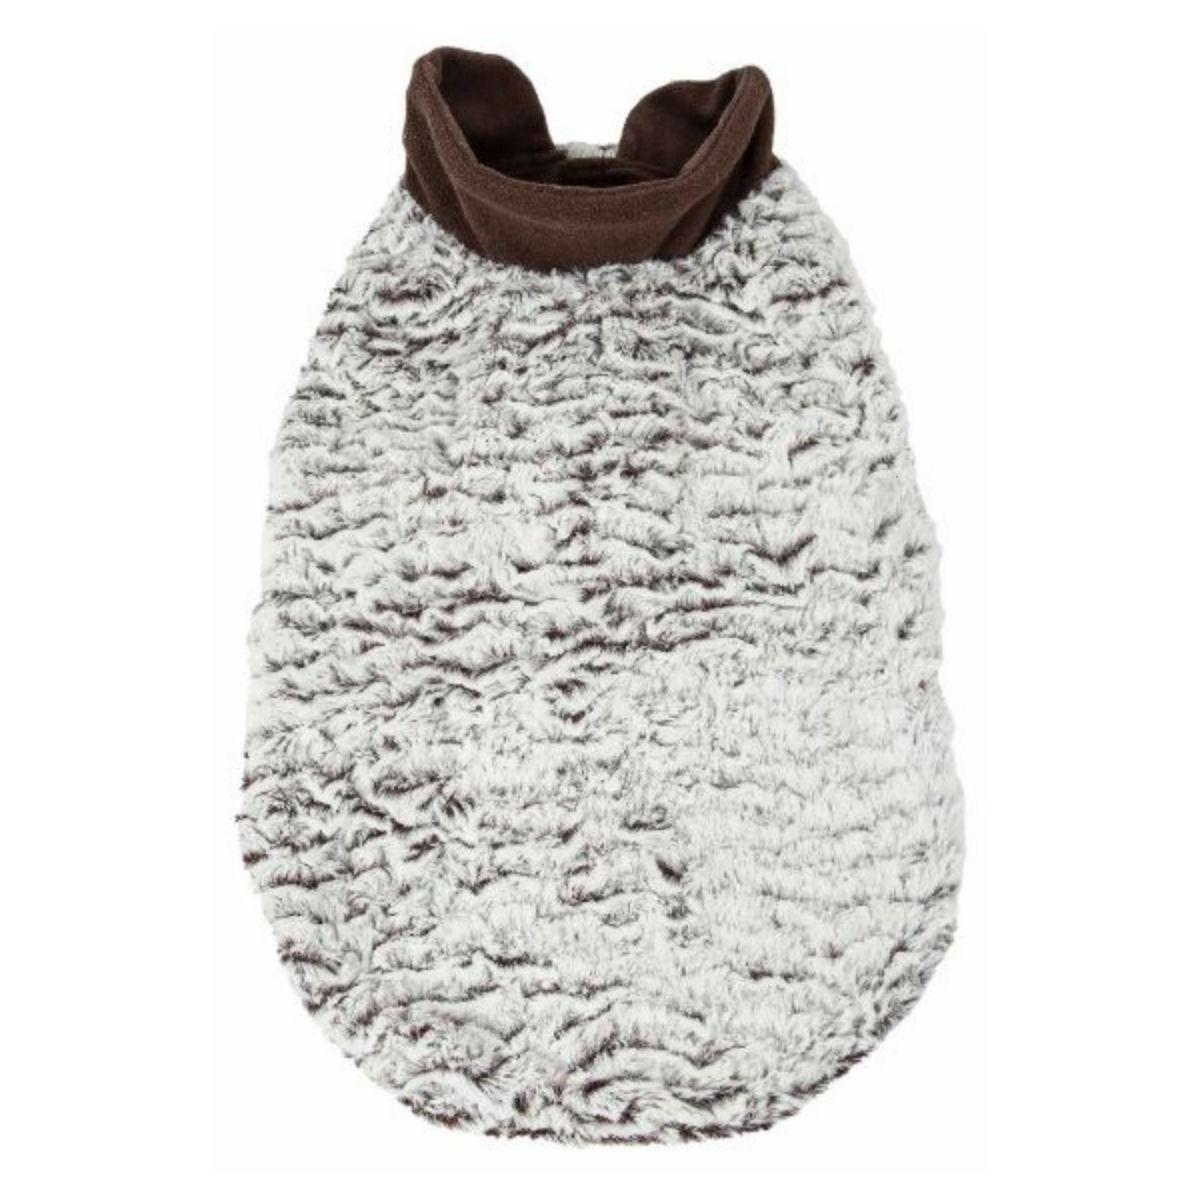 Pet Life Luxe Purrlage Mink Fur Dog Coat - White and Brown